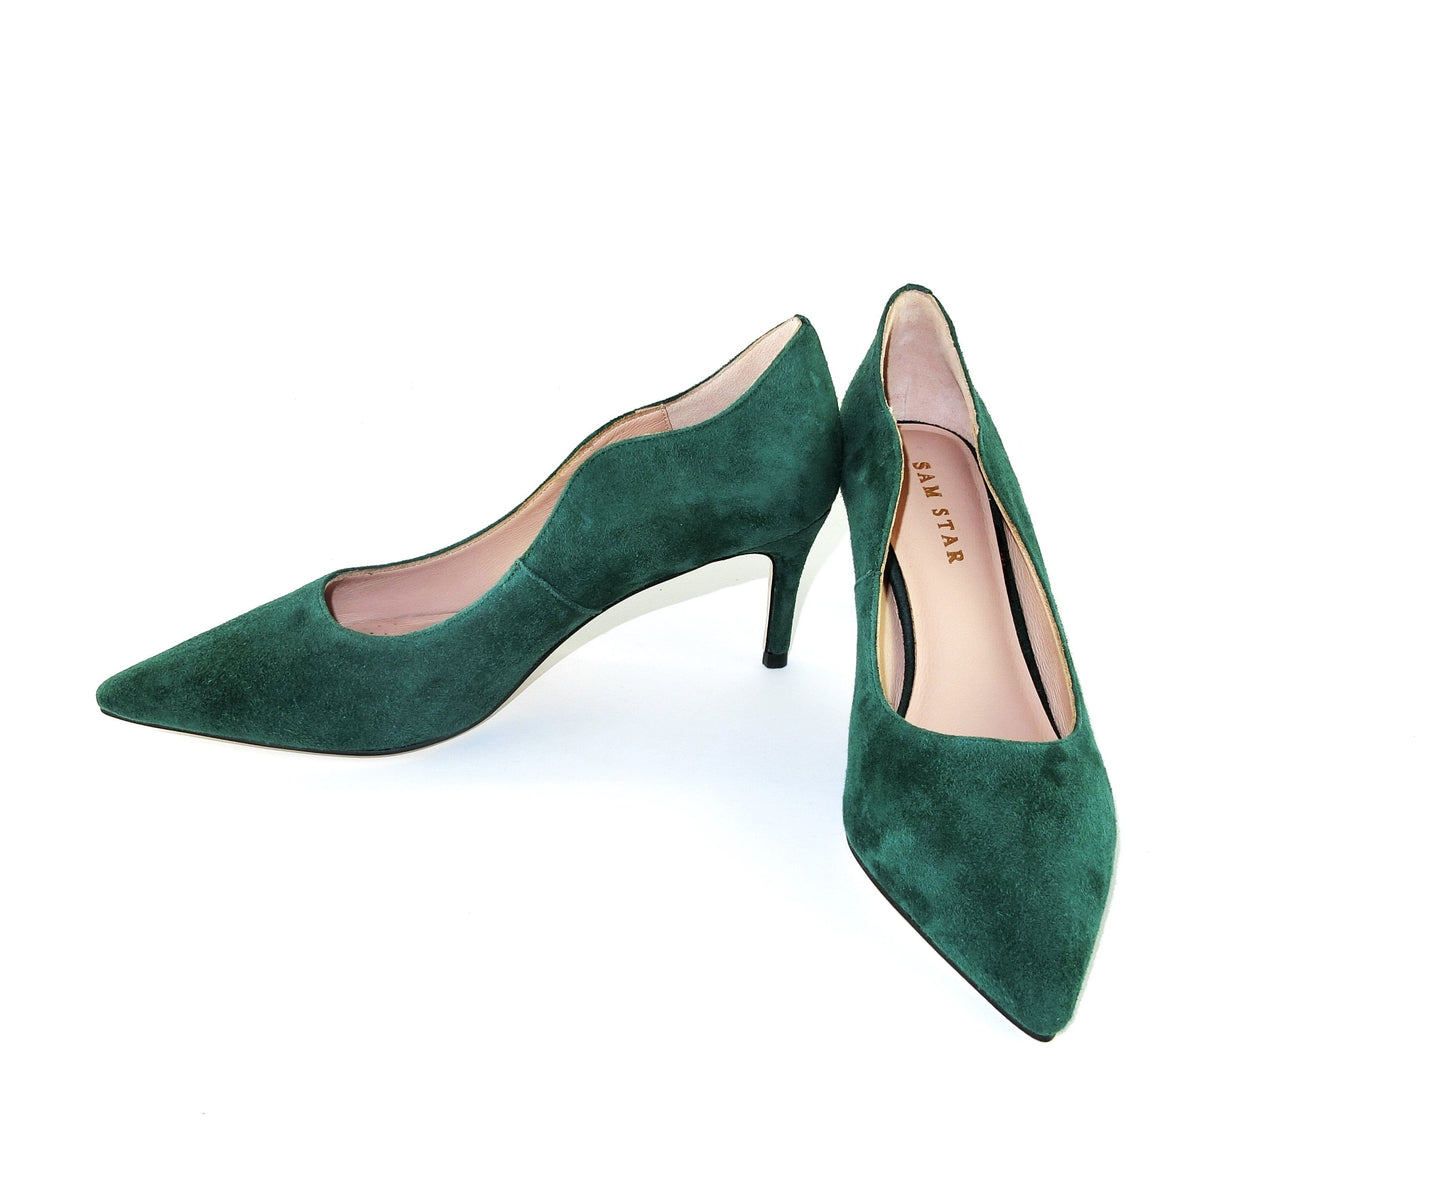 SS23007 Leather court shoes with curve design- Dark green ladies shoes Sam Star shoes Dark green 39/6 